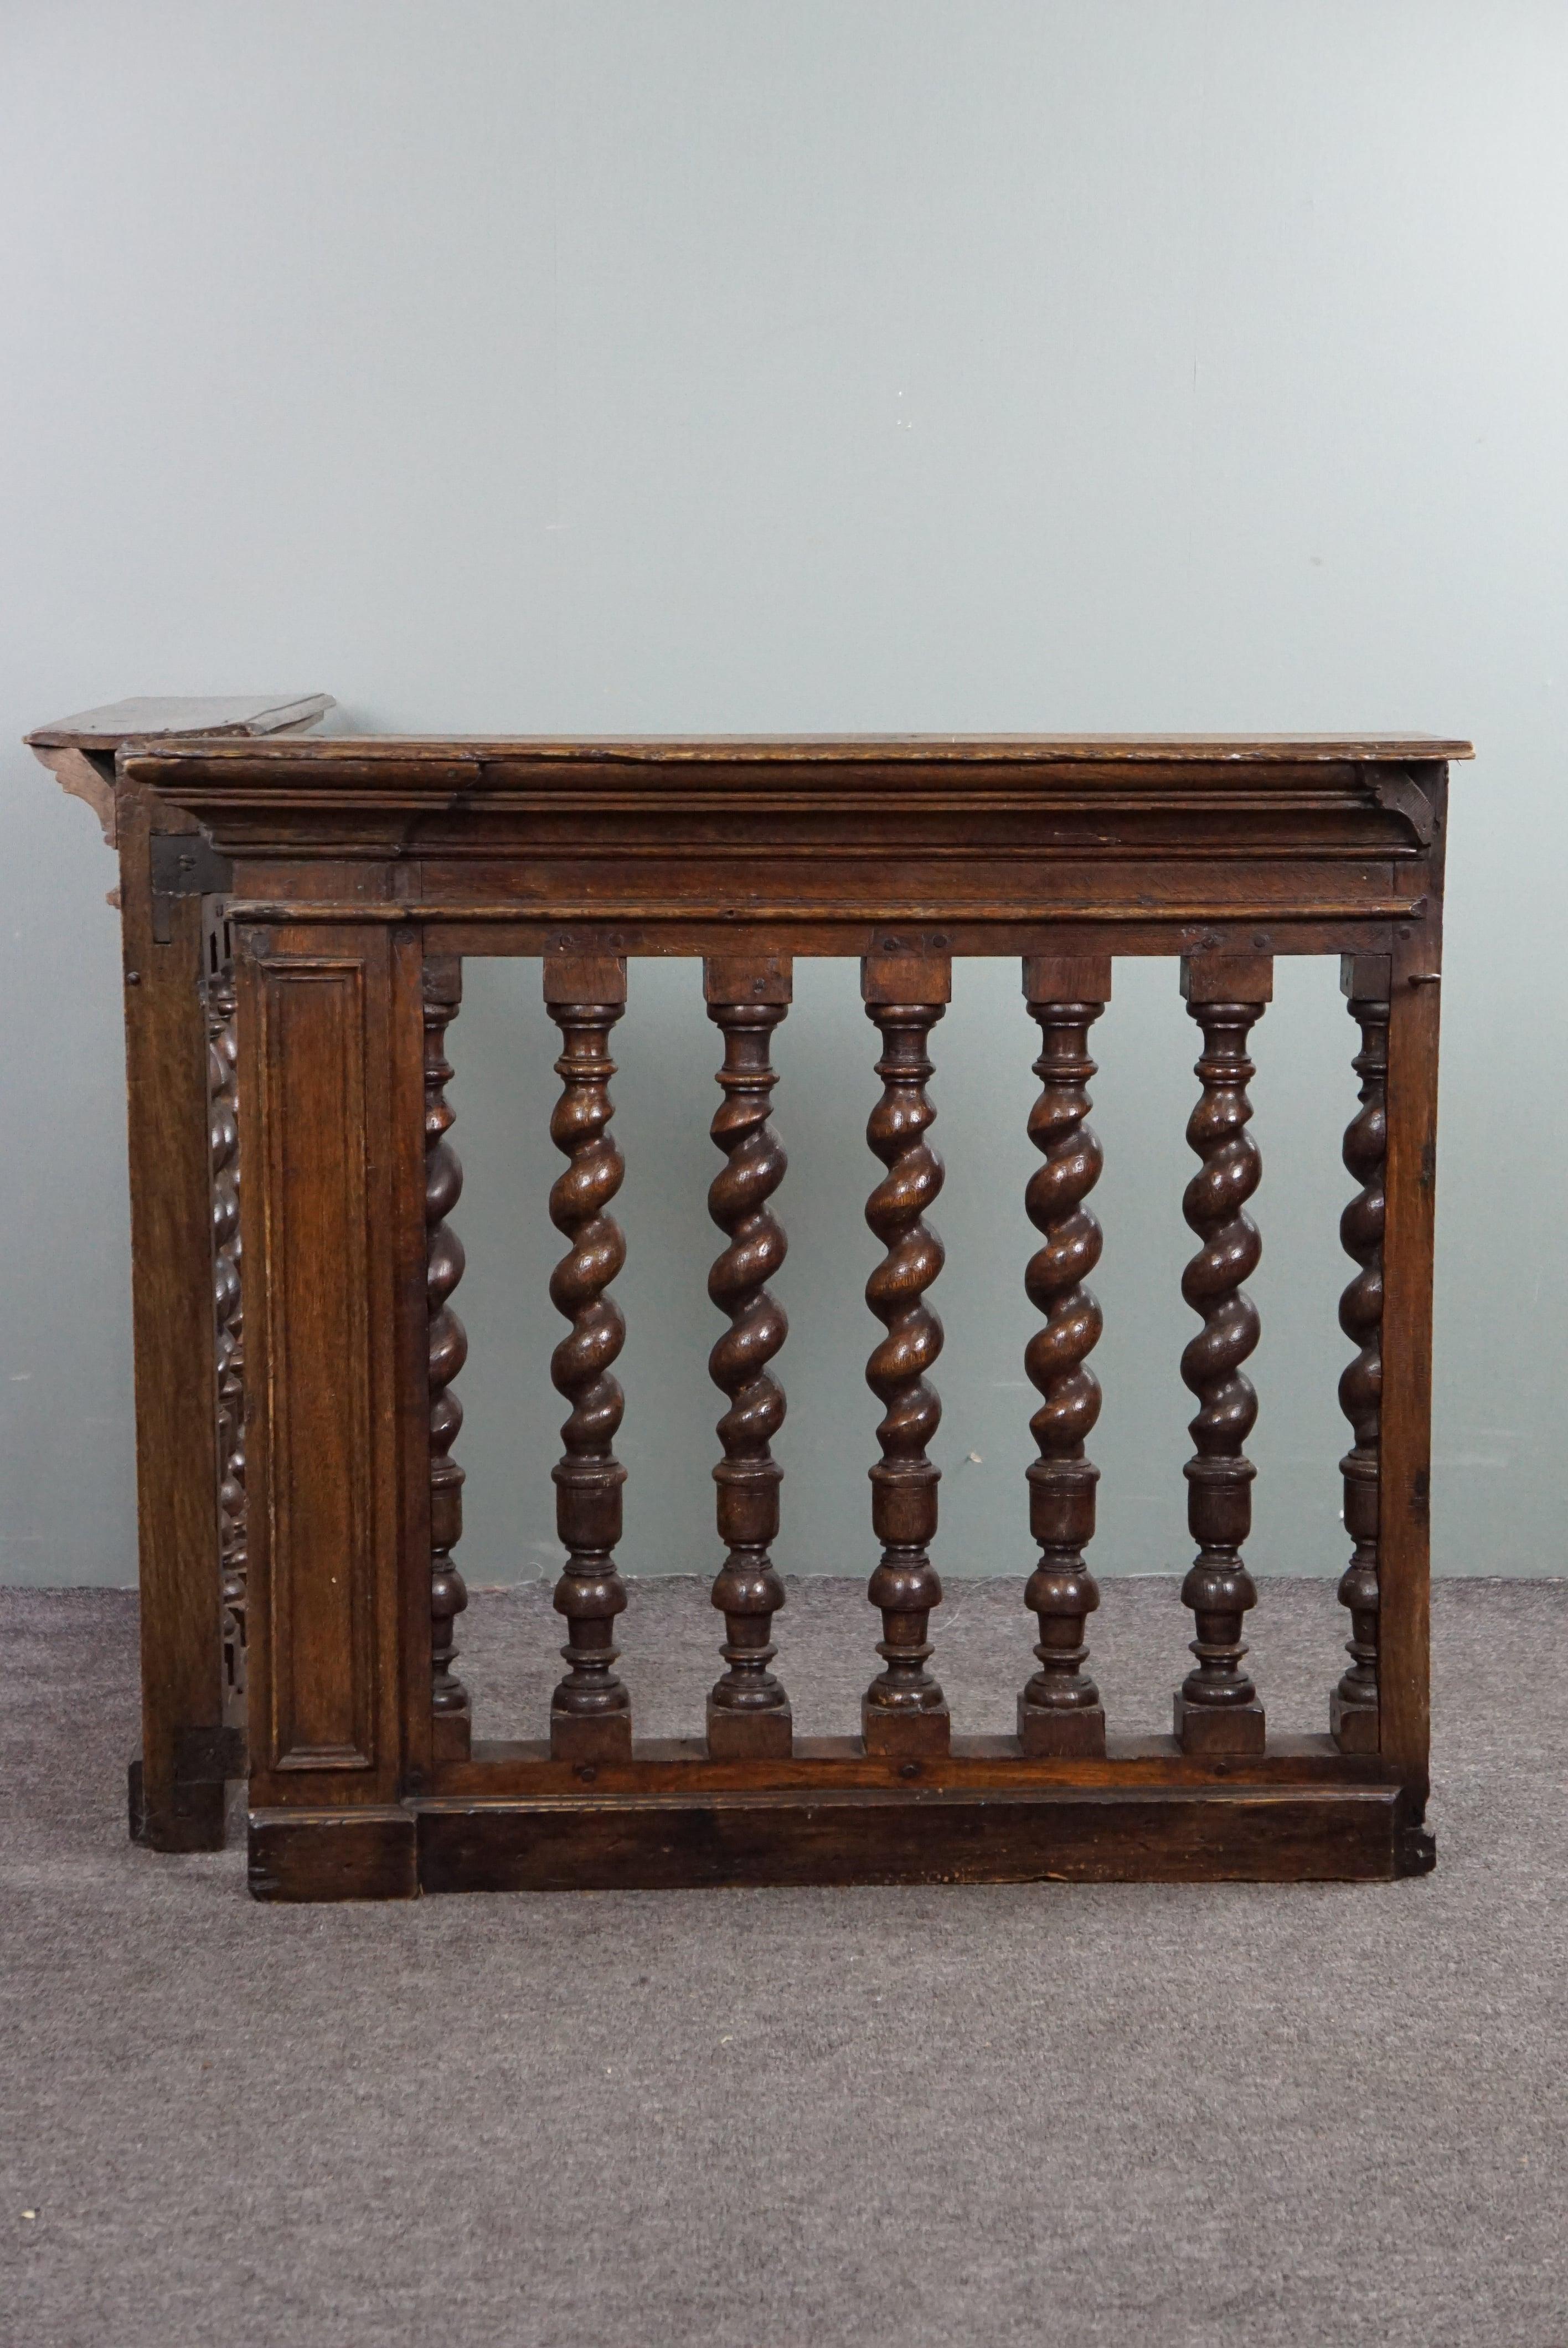 Hand-Crafted Antique English church balustrade